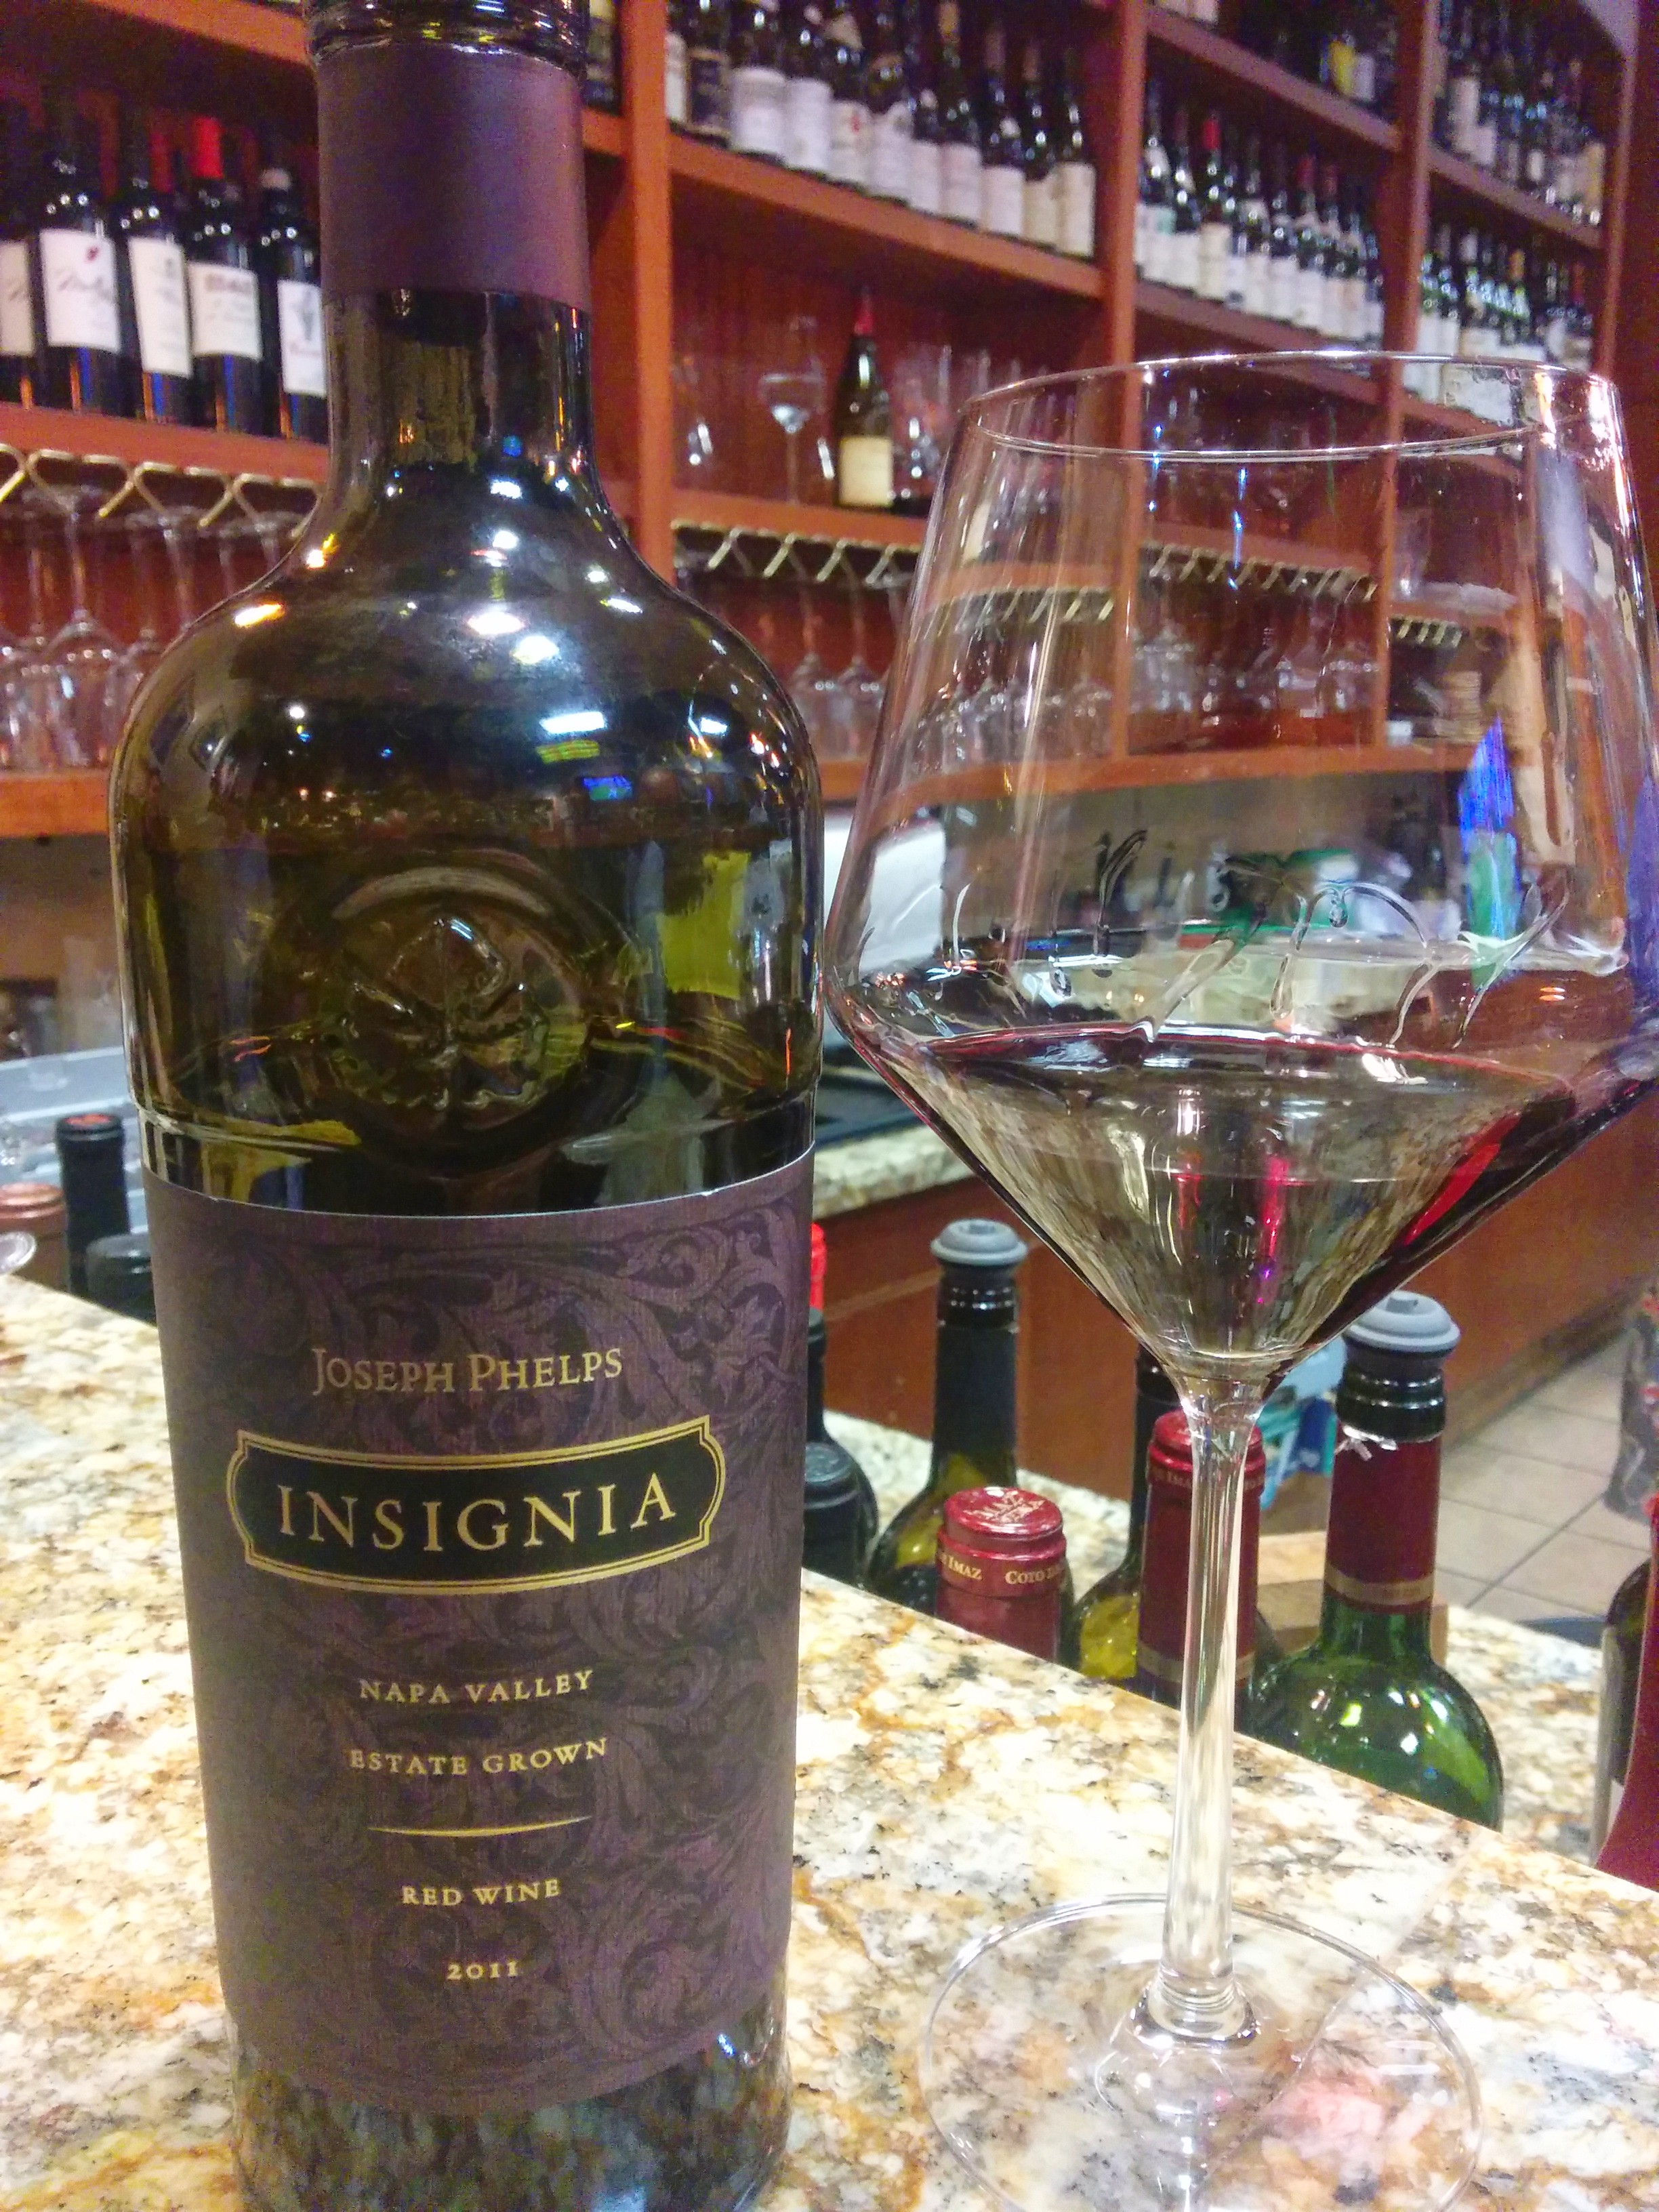 Joseph Phelps Insignia Review: One of Napa's Best Red Wines